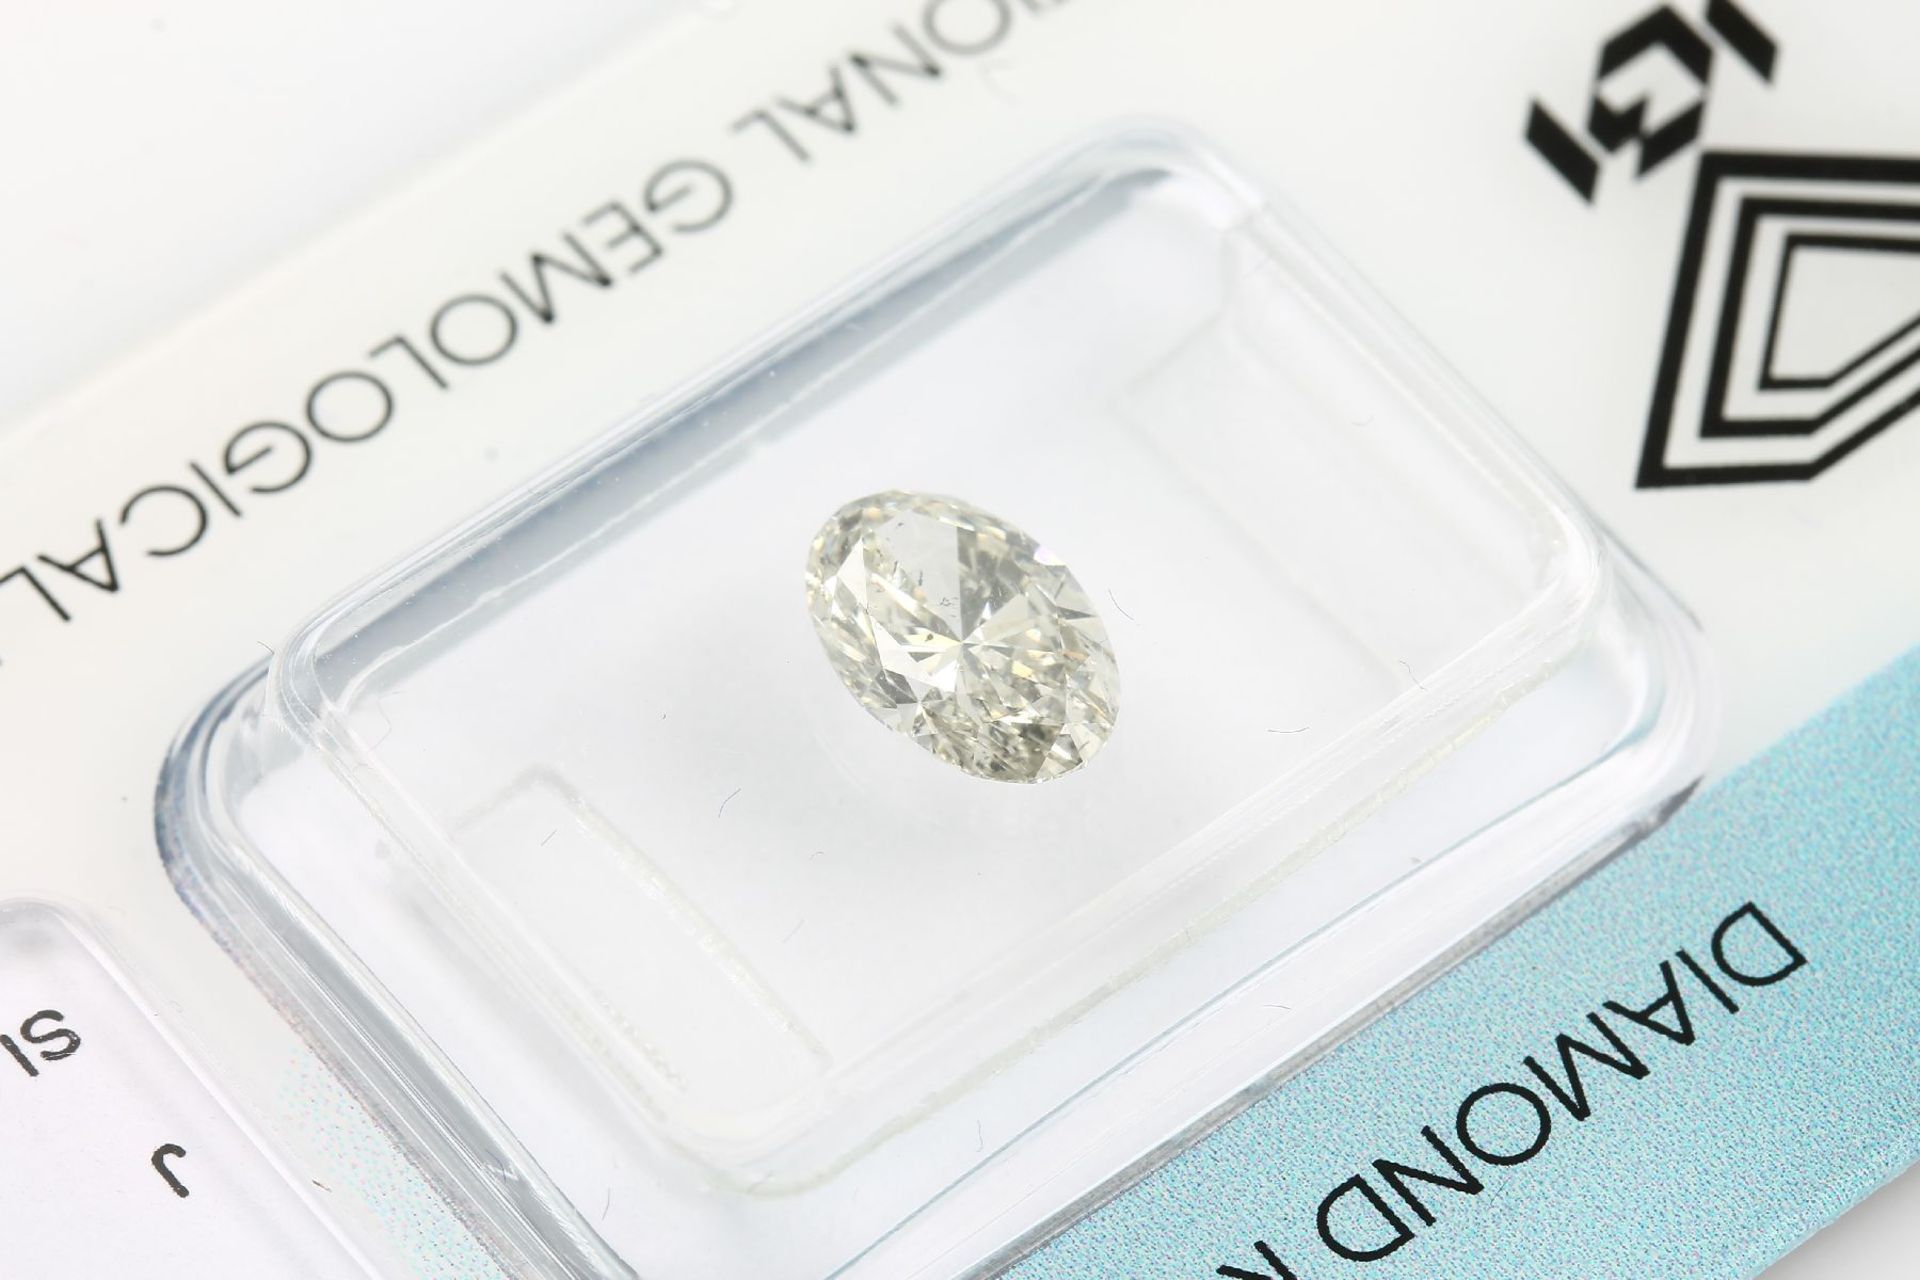 Loser Diamant, 1.01 ct l.get.Weiß (J)/si2, oval facett., - Image 2 of 3